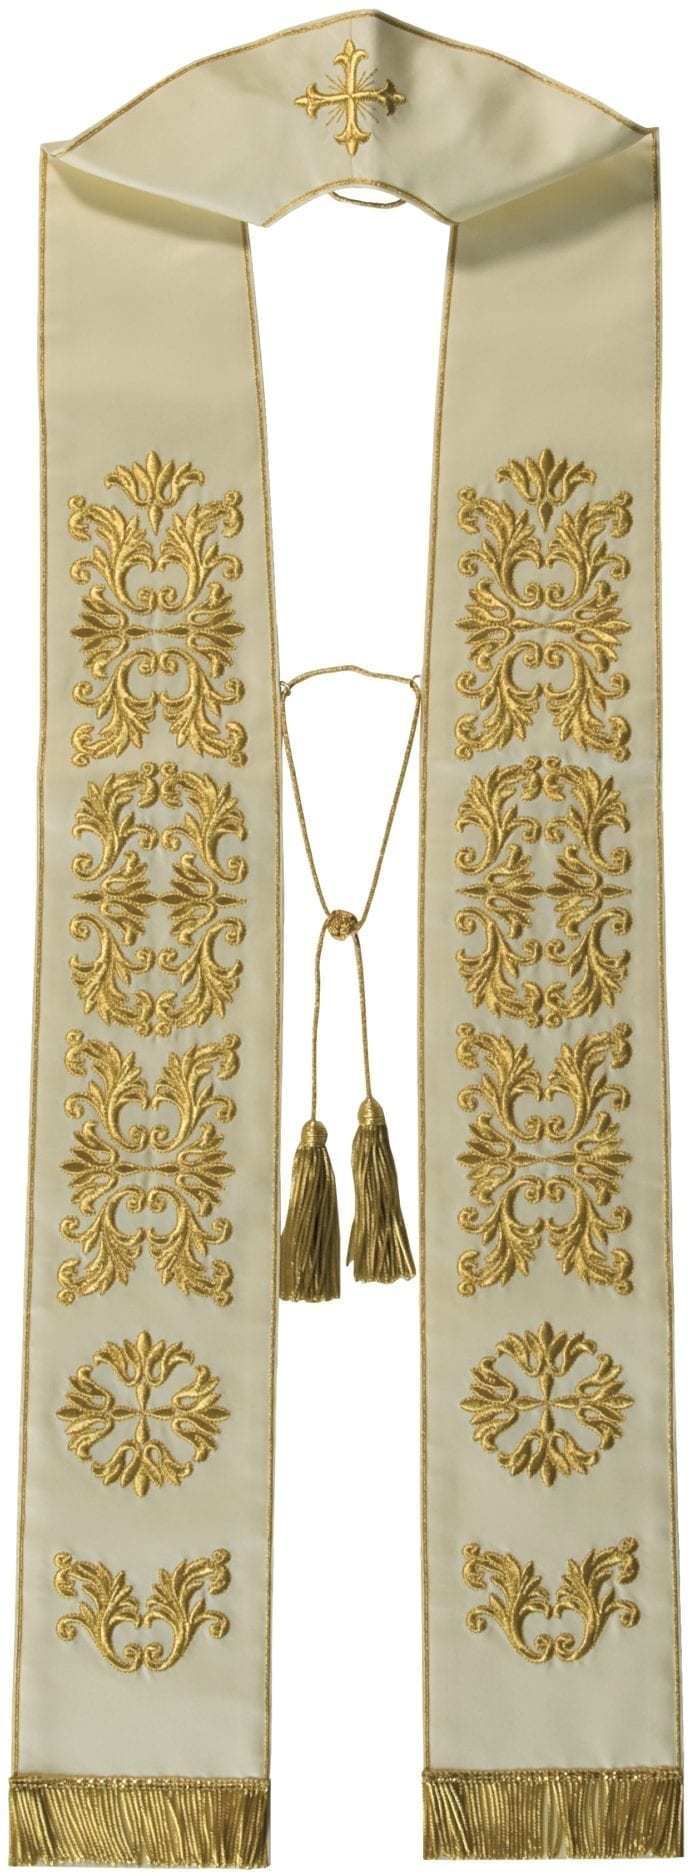 "Jericho" Maranatha Lab stole in micromonastic fabric entirely embroidered in gold with floral motifs.